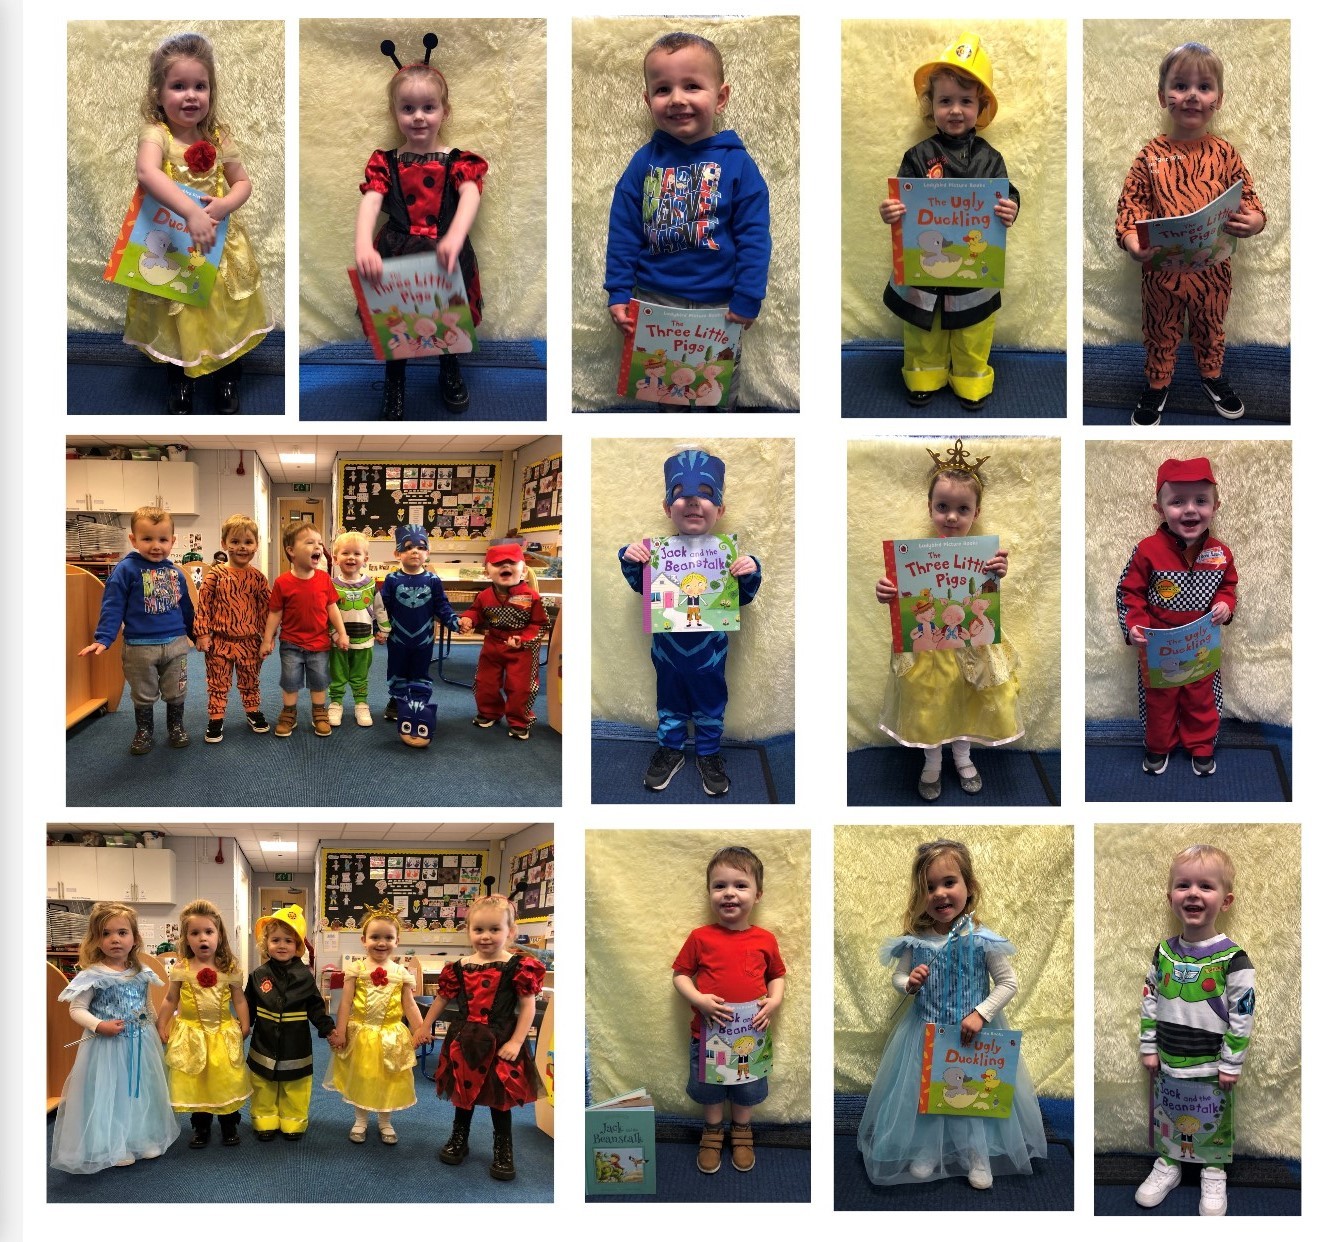 Children at Busy Bees Playgroup, in Flint, on World Book Day.